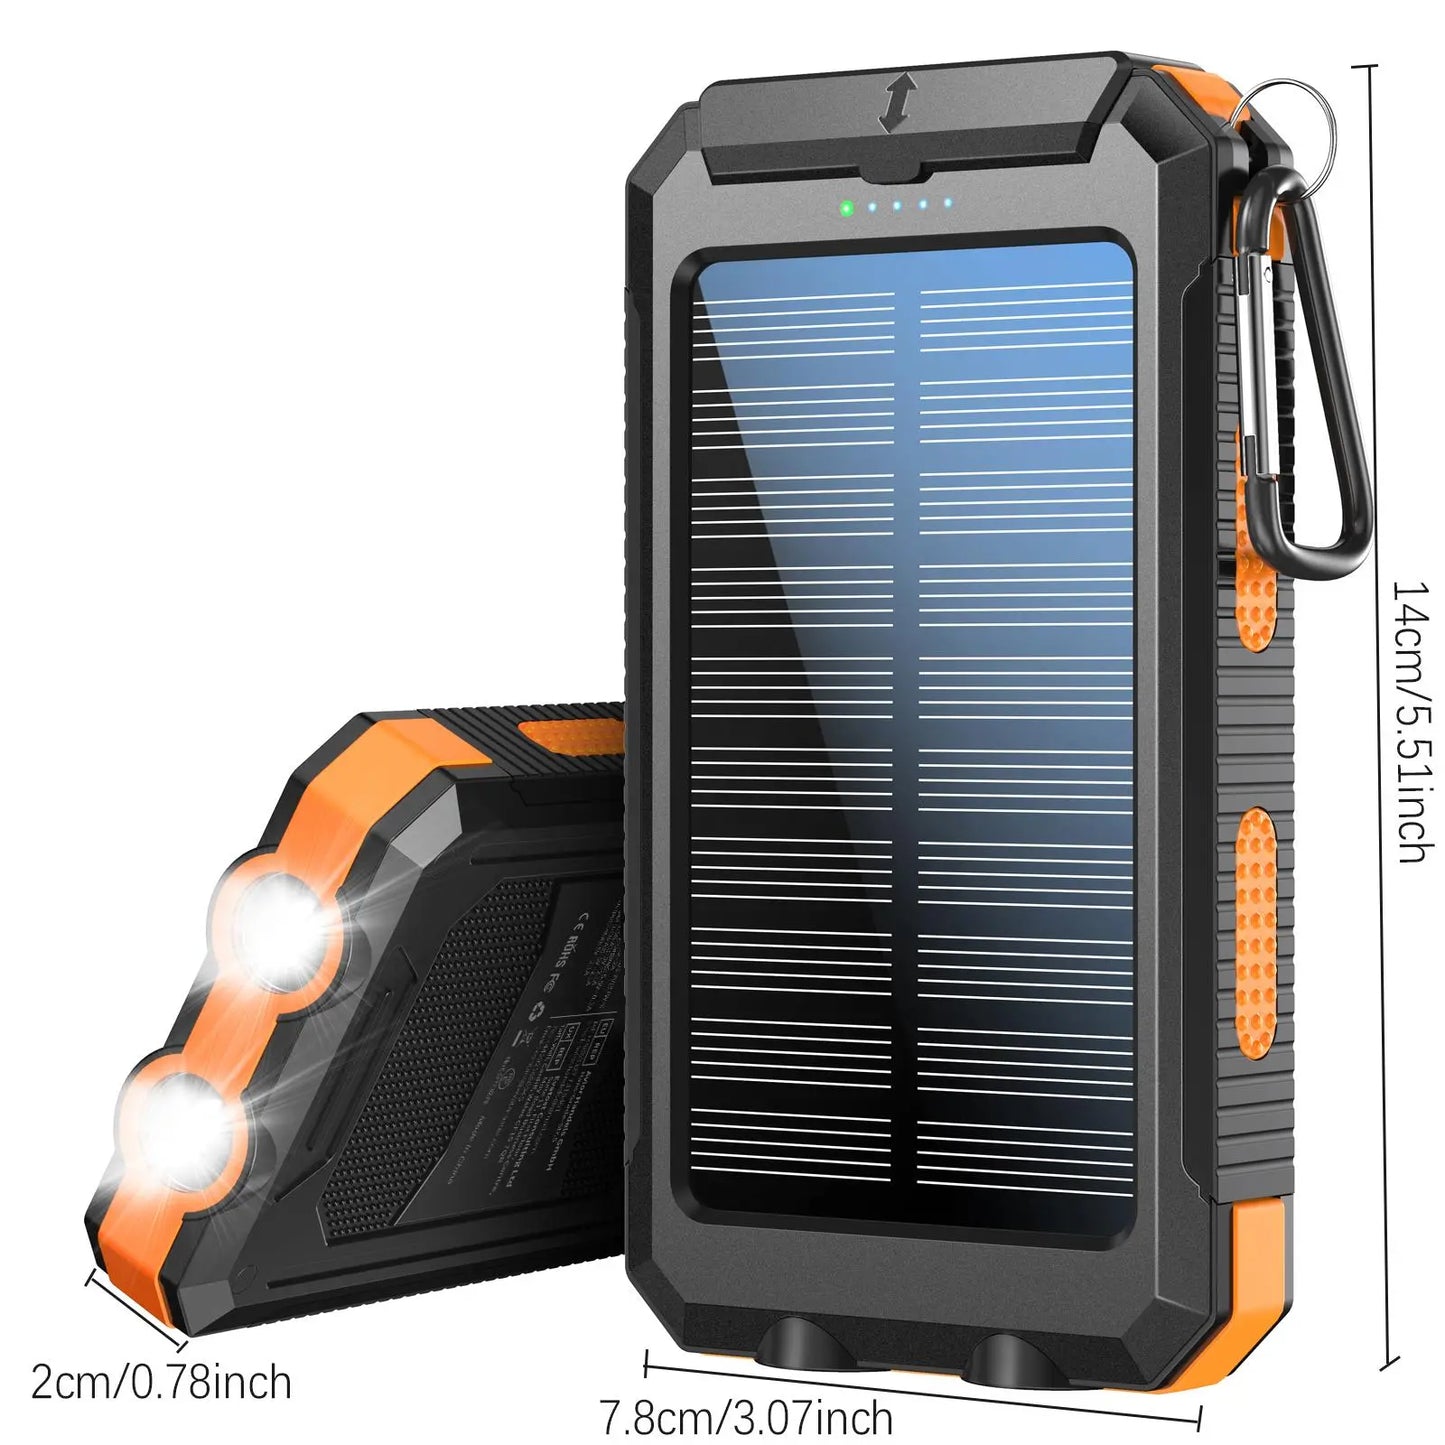 10000Mah Portable Solar Power Bank, 1 Piece Dual USB Output Port Waterproof Power Bank with LED Light, Solar Charger Power Bank, Solar Panel Charger, Solar Phone Charger Compatible with Iphone & Android Phone for Spring Camping